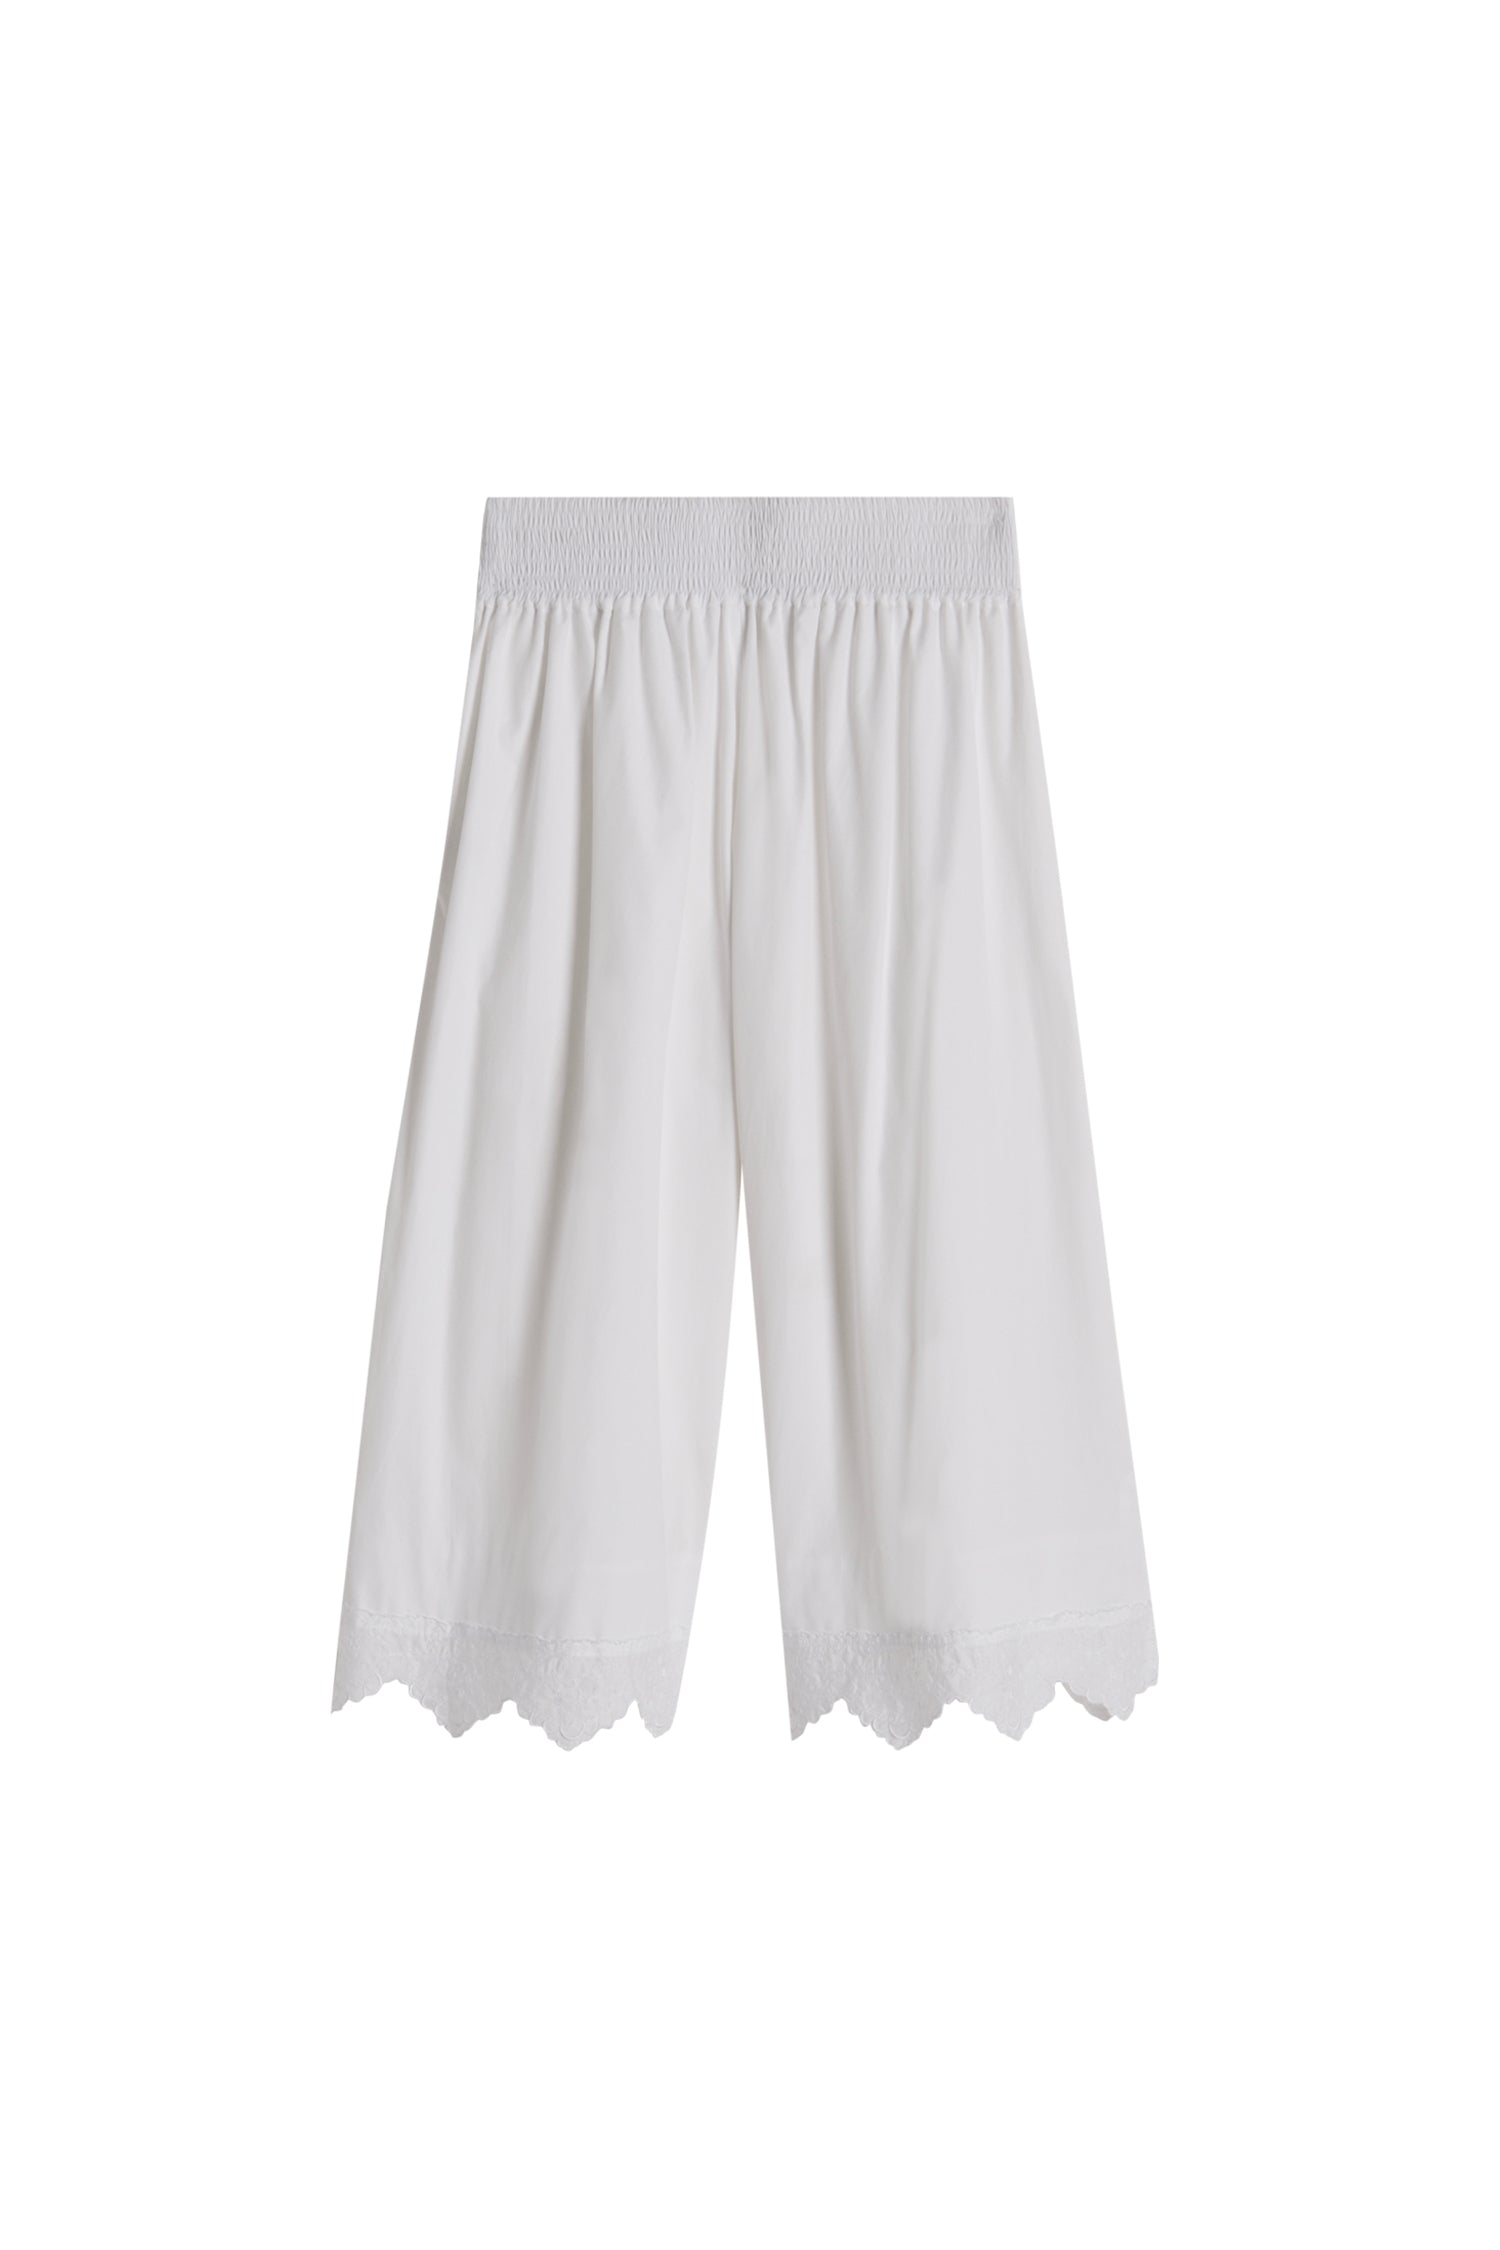 ELASTICATED COTTON BOXING SHORT WITH TRIM IN WHITE, AW23